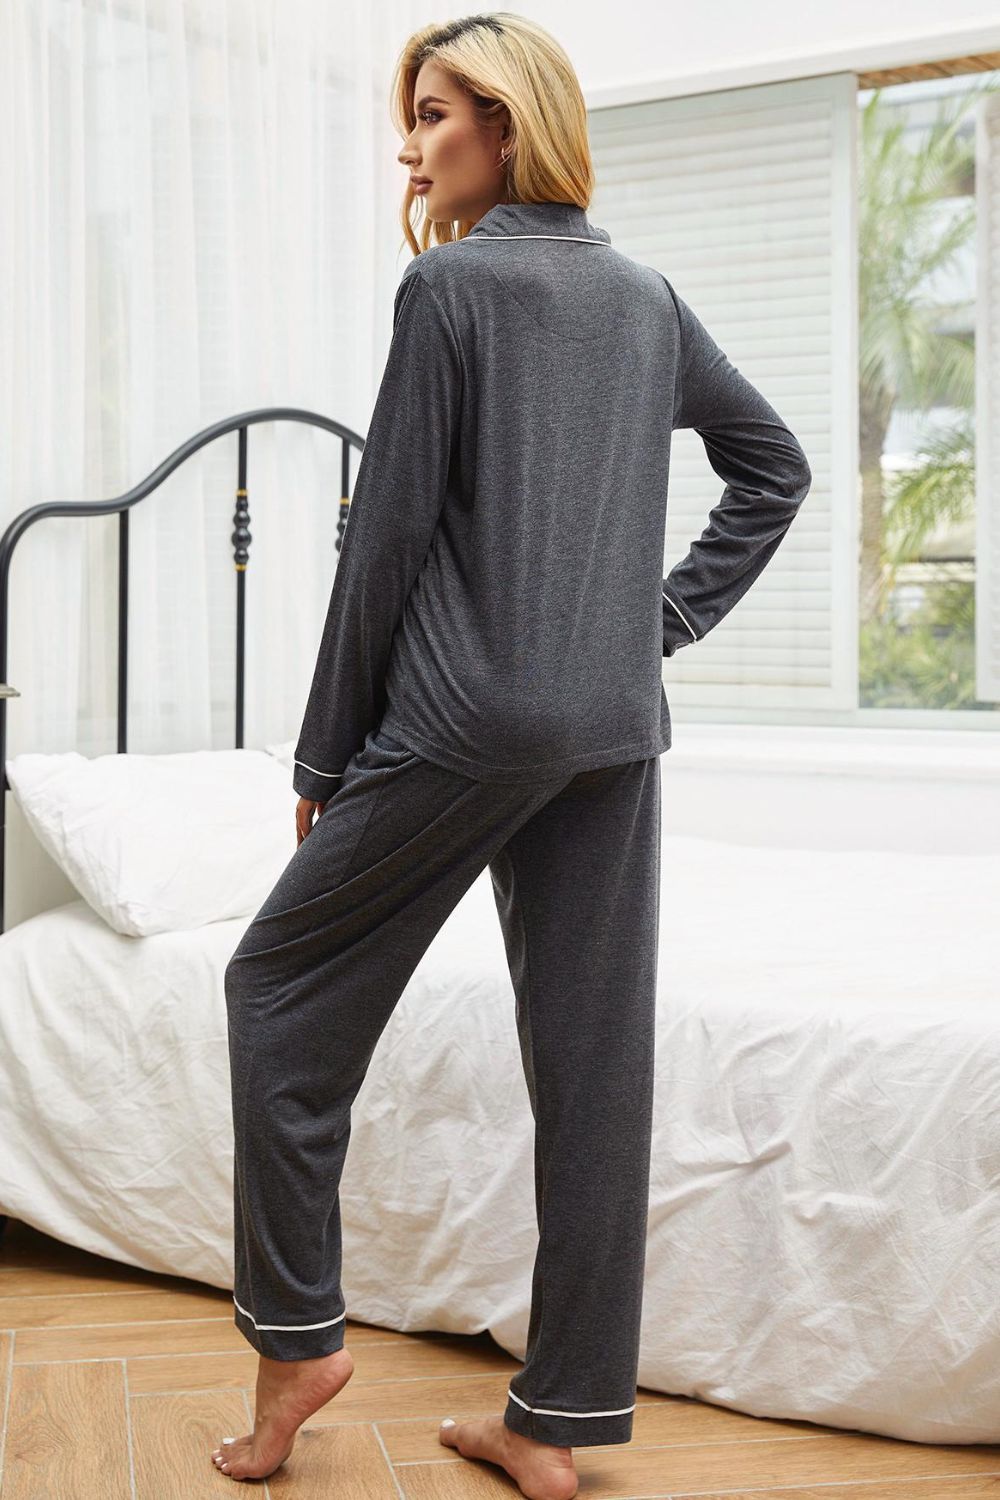 Dark Slate Gray Blessed Mess Contrast Piping Button Down Top and Pants Loungewear Set Pajamas